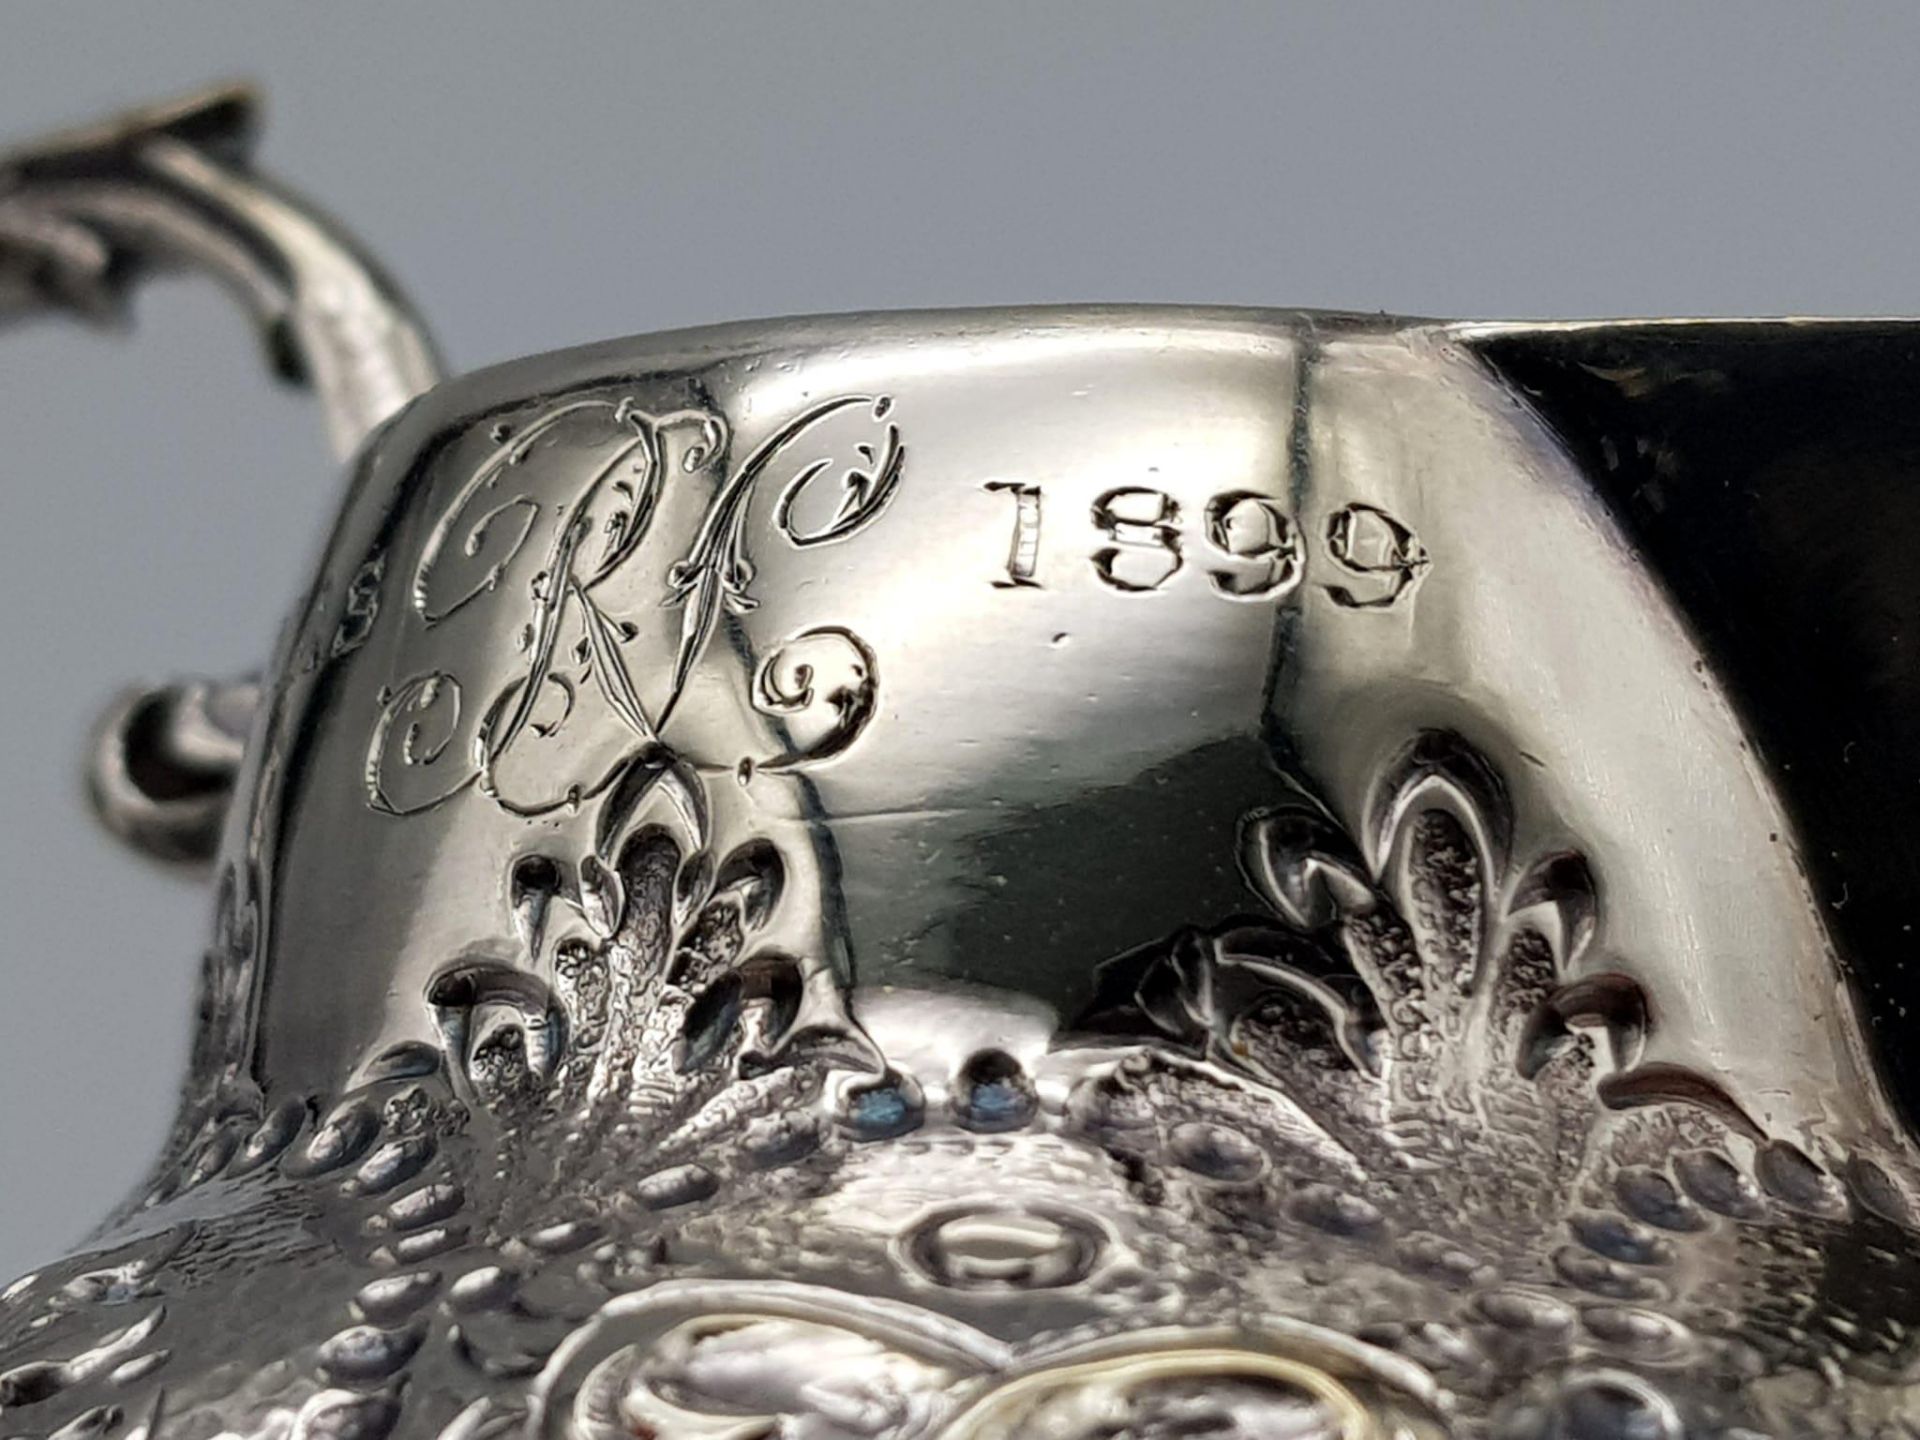 A SMALL SOLID SILVER JUG WITH THE INSCRIPTION "XMAS 1899" ALTHOUGH THE HALLMARK IS DATED 1891 WITH - Image 8 of 9